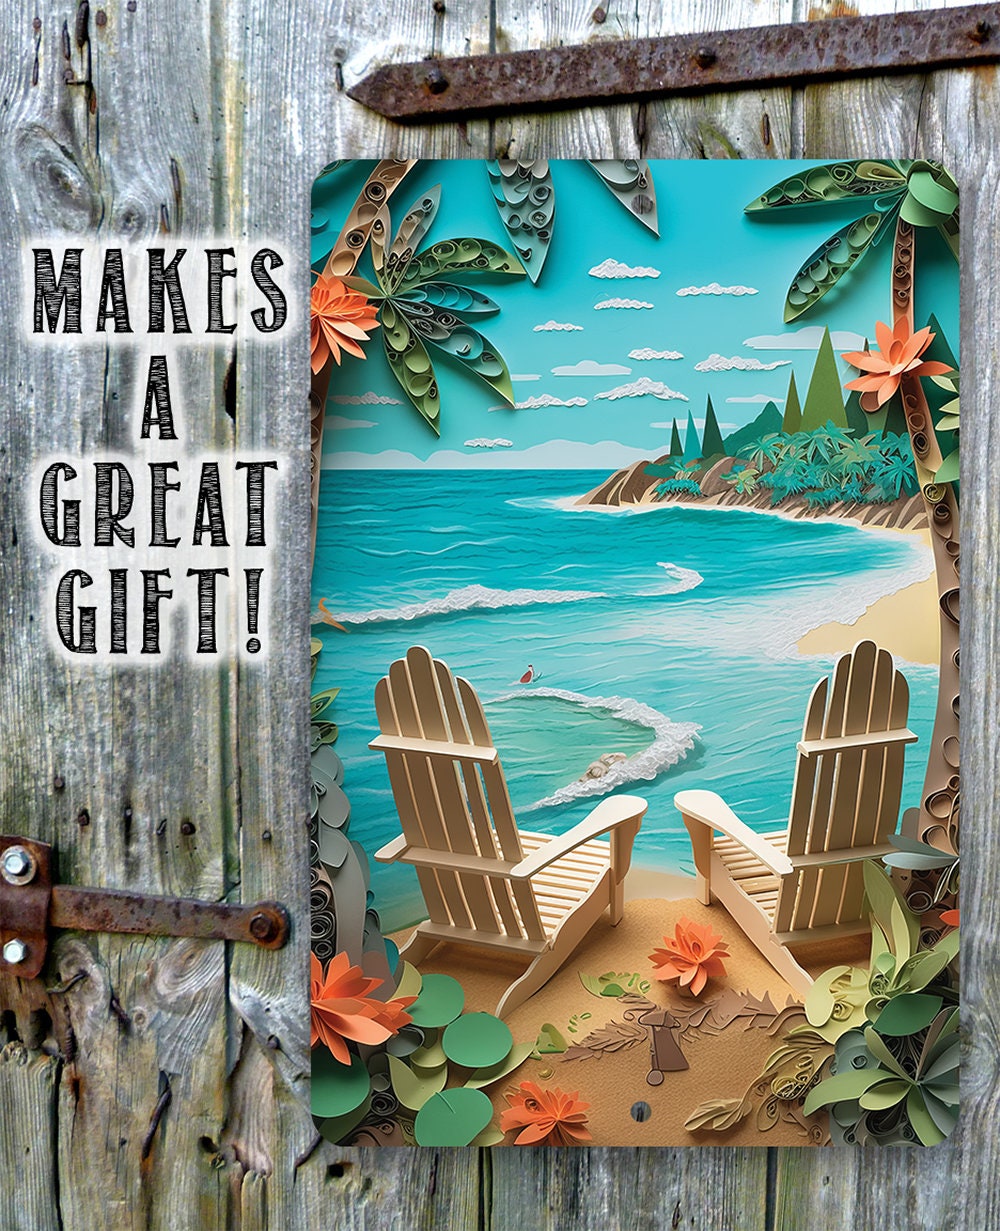 Tin - Beach Dreams - Great Beach and Nautical Decor - Durable Metal Sign - 8" x 12" or 12" x 18" Use Indoor/Outdoor -Great Housewarming Gift